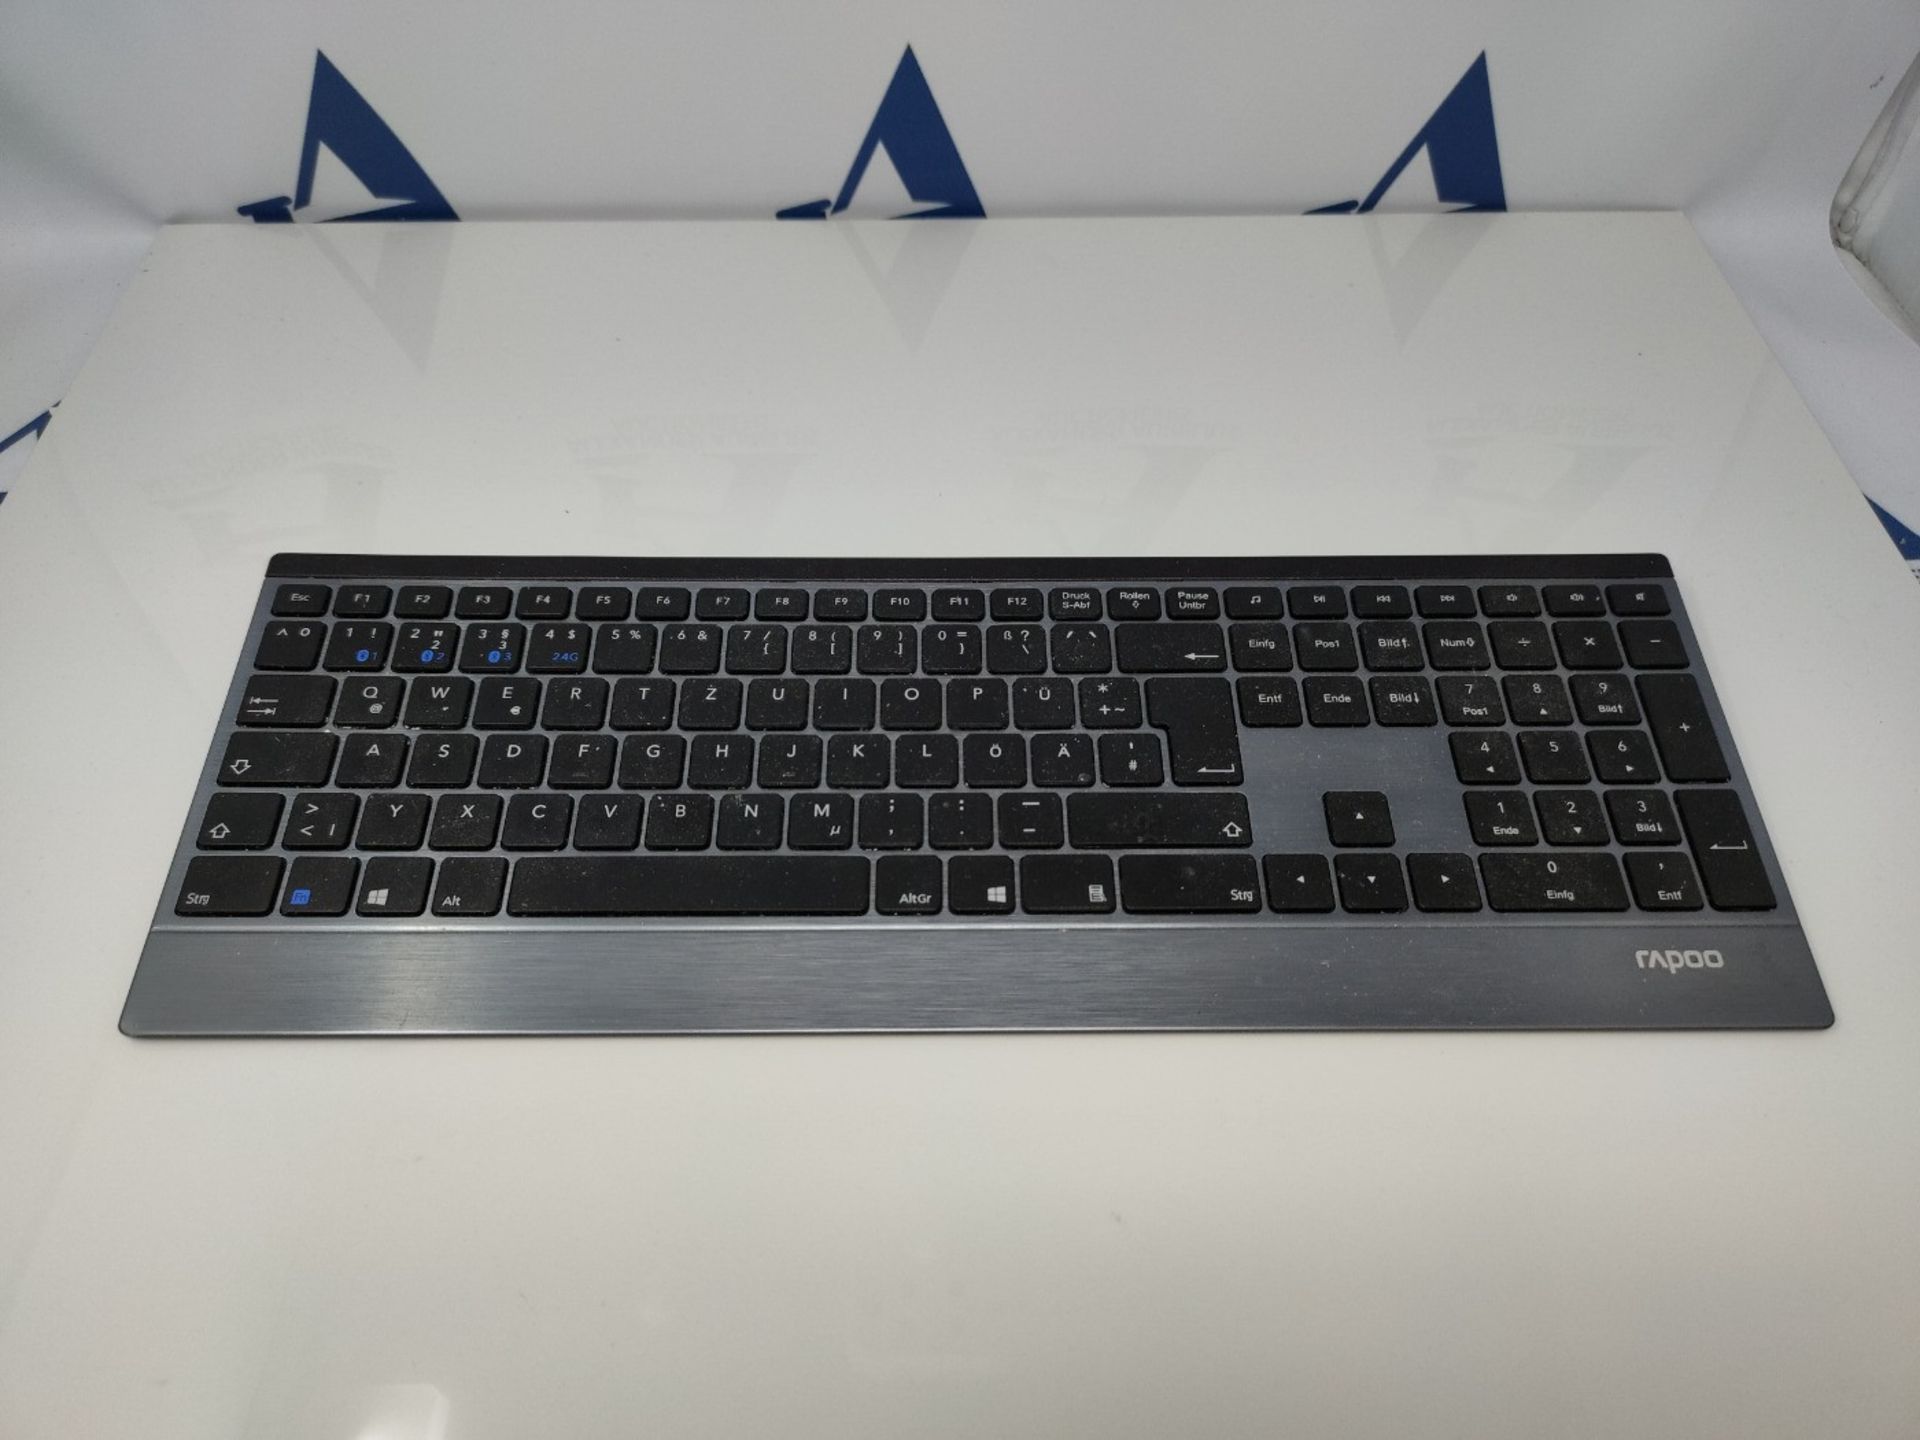 Rapoo E9500M wireless keyboard, Bluetooth and wireless (2.4 GHz) via USB, connect mult - Image 2 of 2